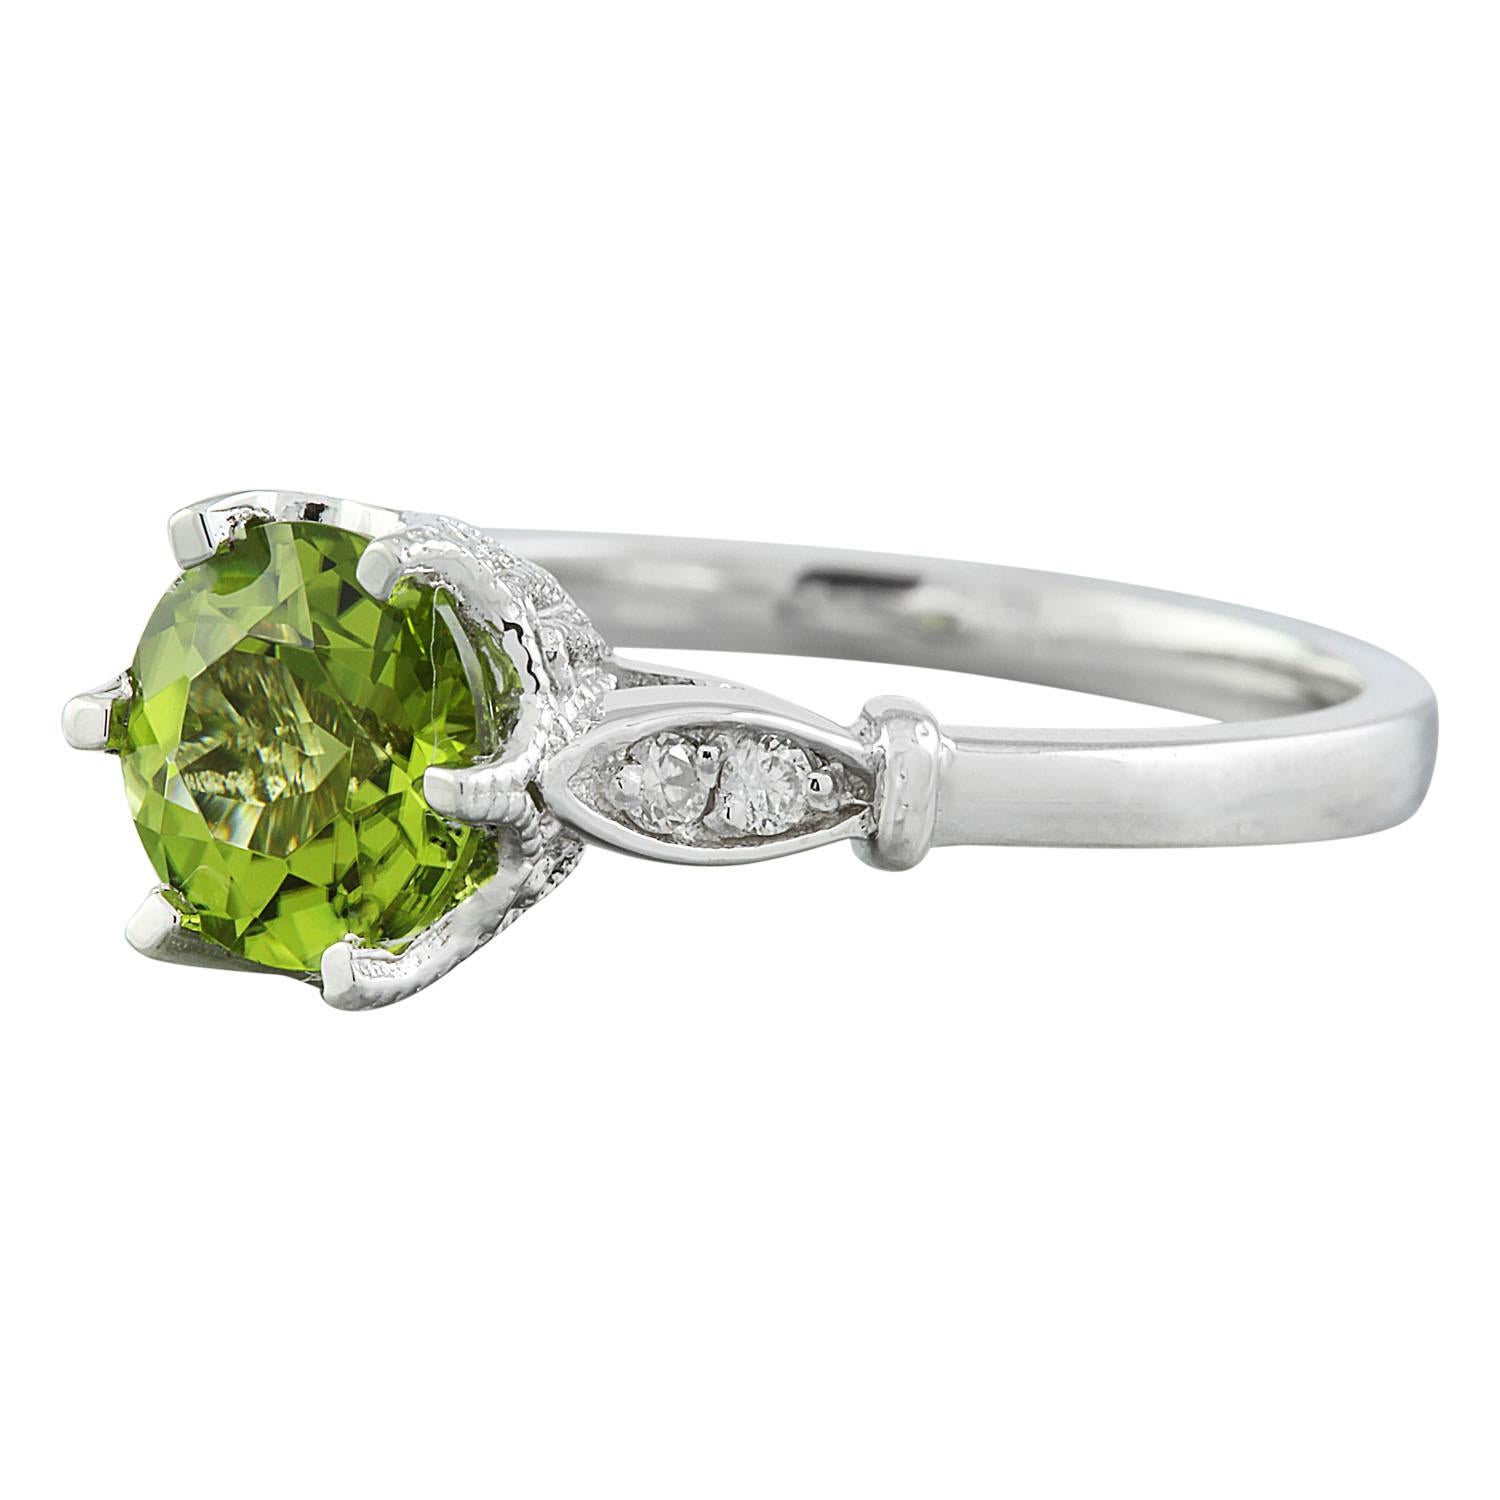 1.50 Carat Natural Peridot 14 Karat Solid White Gold Diamond Ring
Stamped: 14K 
Ring Size 7
Total Ring Weight: 3.4 Grams 
Peridot Weight 1.40 Carat (7.00x7.00 Millimeters)
Diamond Weight: 0.10 carat (F-G Color, VS2-SI1 Clarity)
Face Measures: